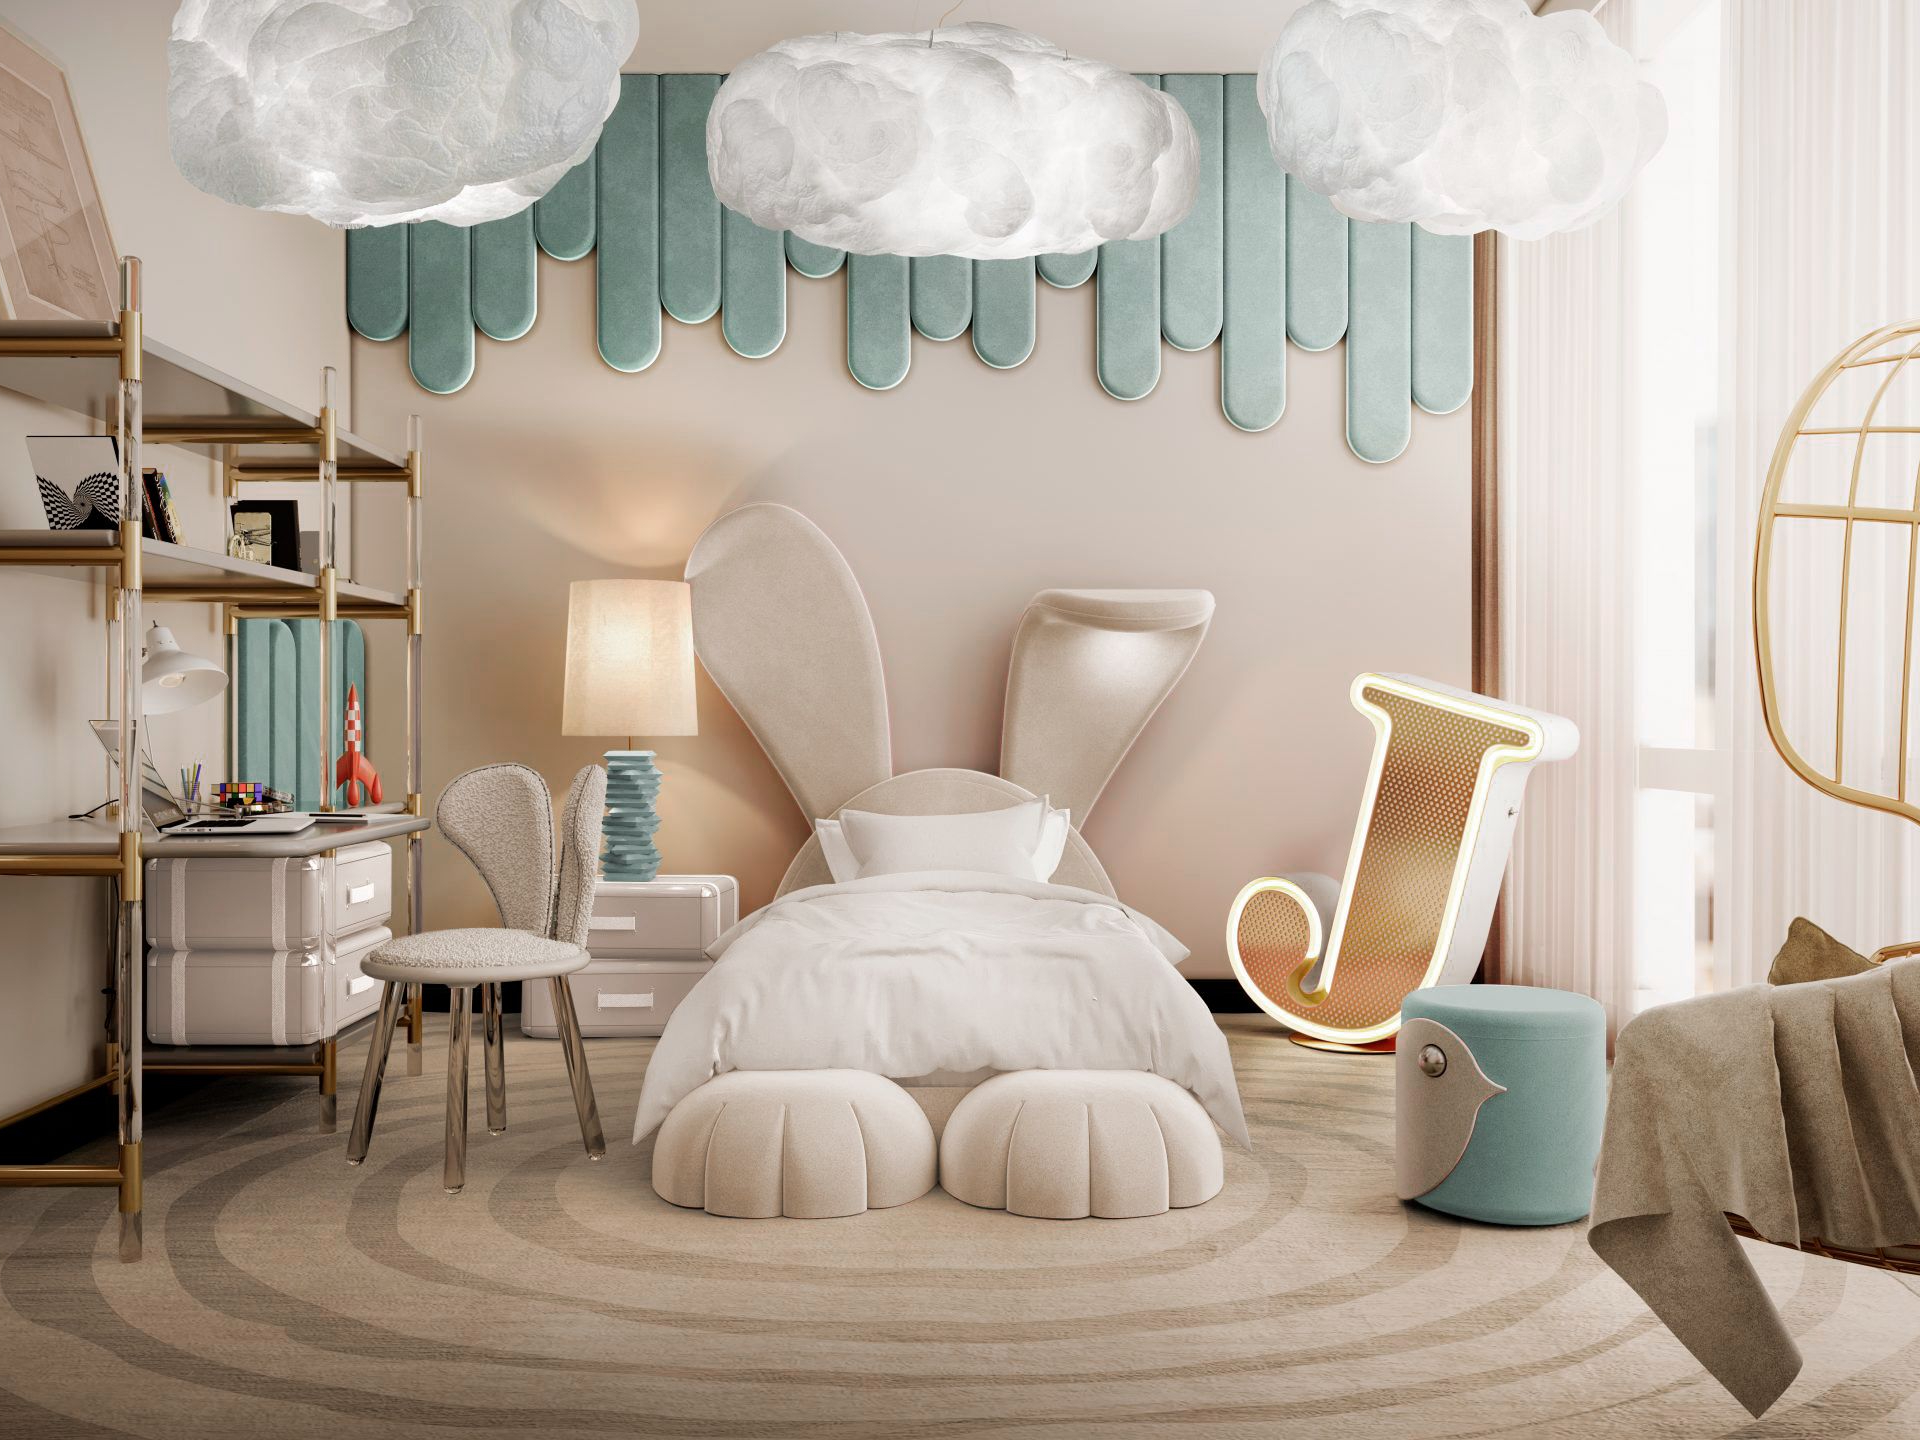 Exciting Kid's Bedroom With The Neutral Version of the Eye Rug by Rug'Society